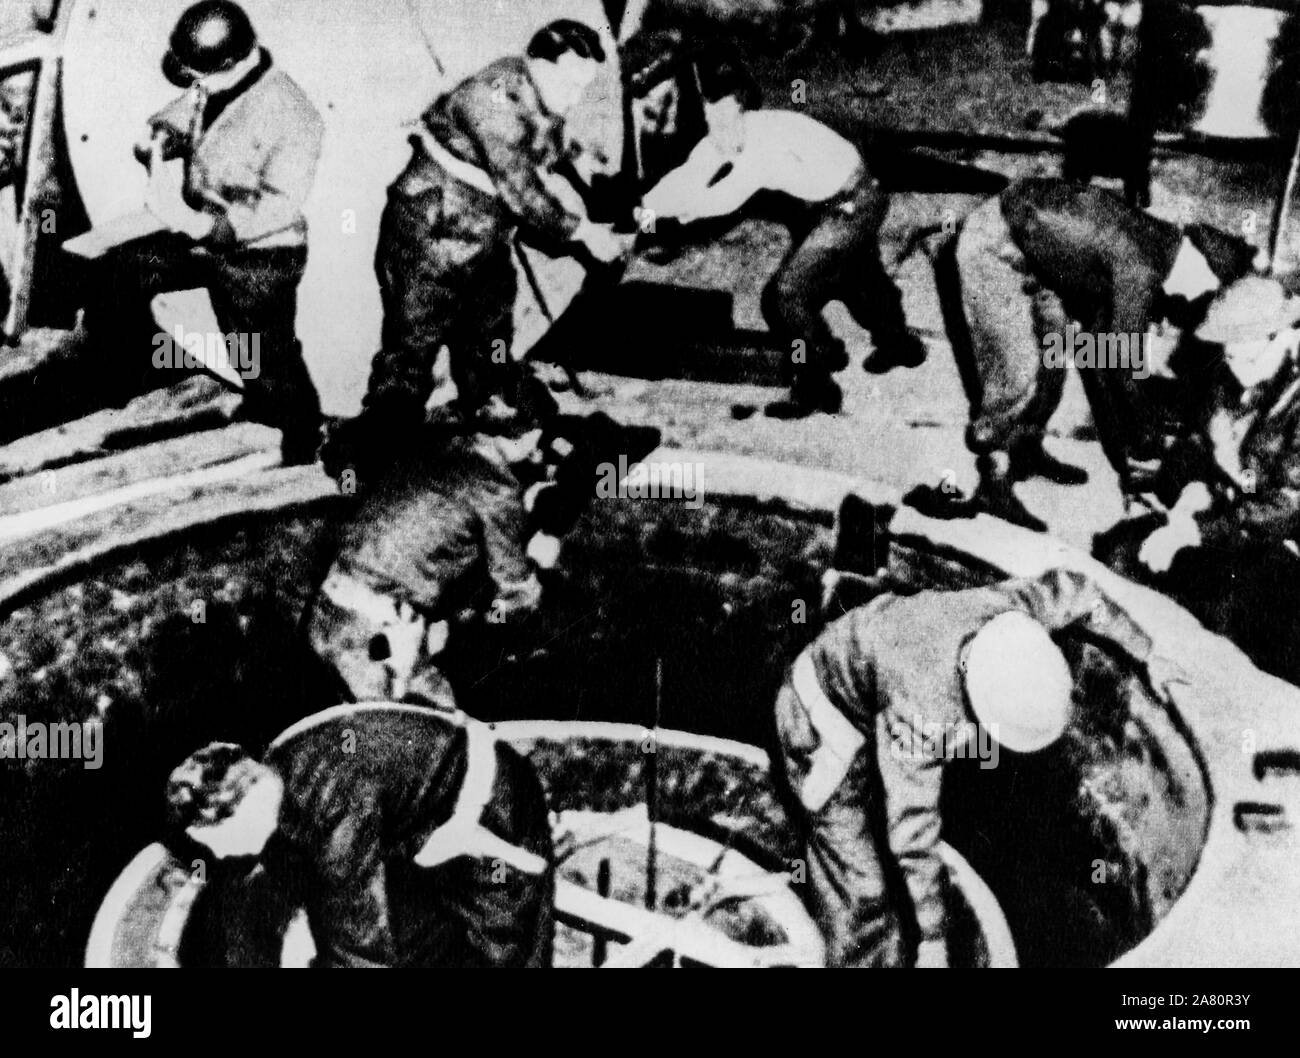 Allied soldiers dismantle a nuclear reactor, World War II Stock Photo